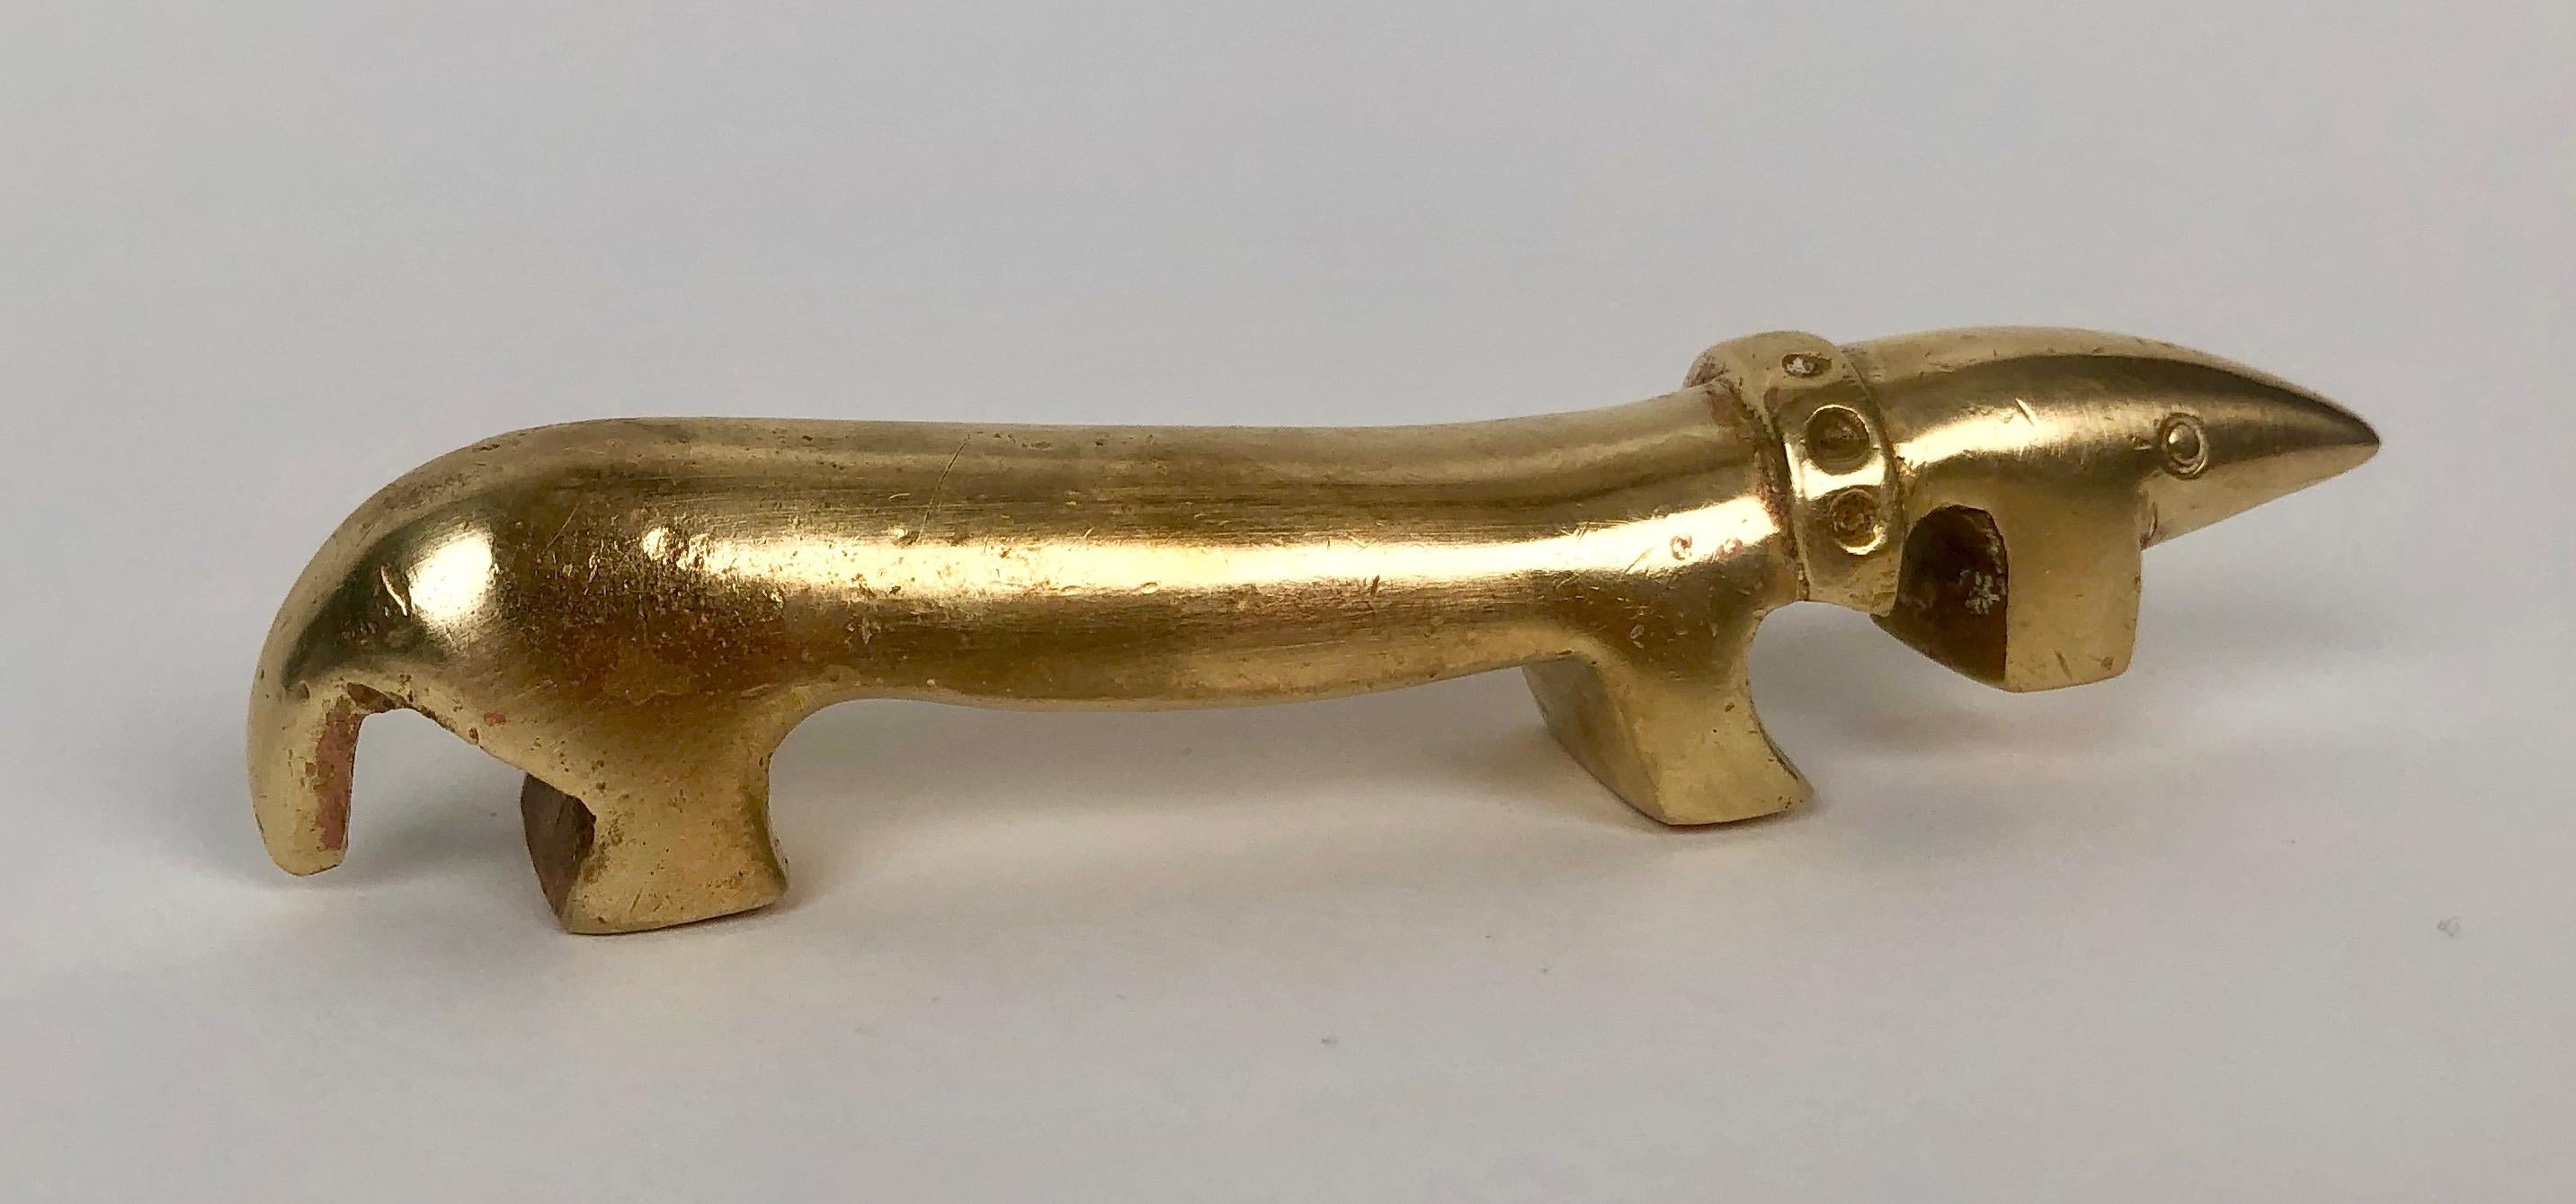 Charming mid-century bottle opener in the form of a Dachshund. 
Made out of solid brass, designed by Walter Bosse, produced by Herta Baller.
